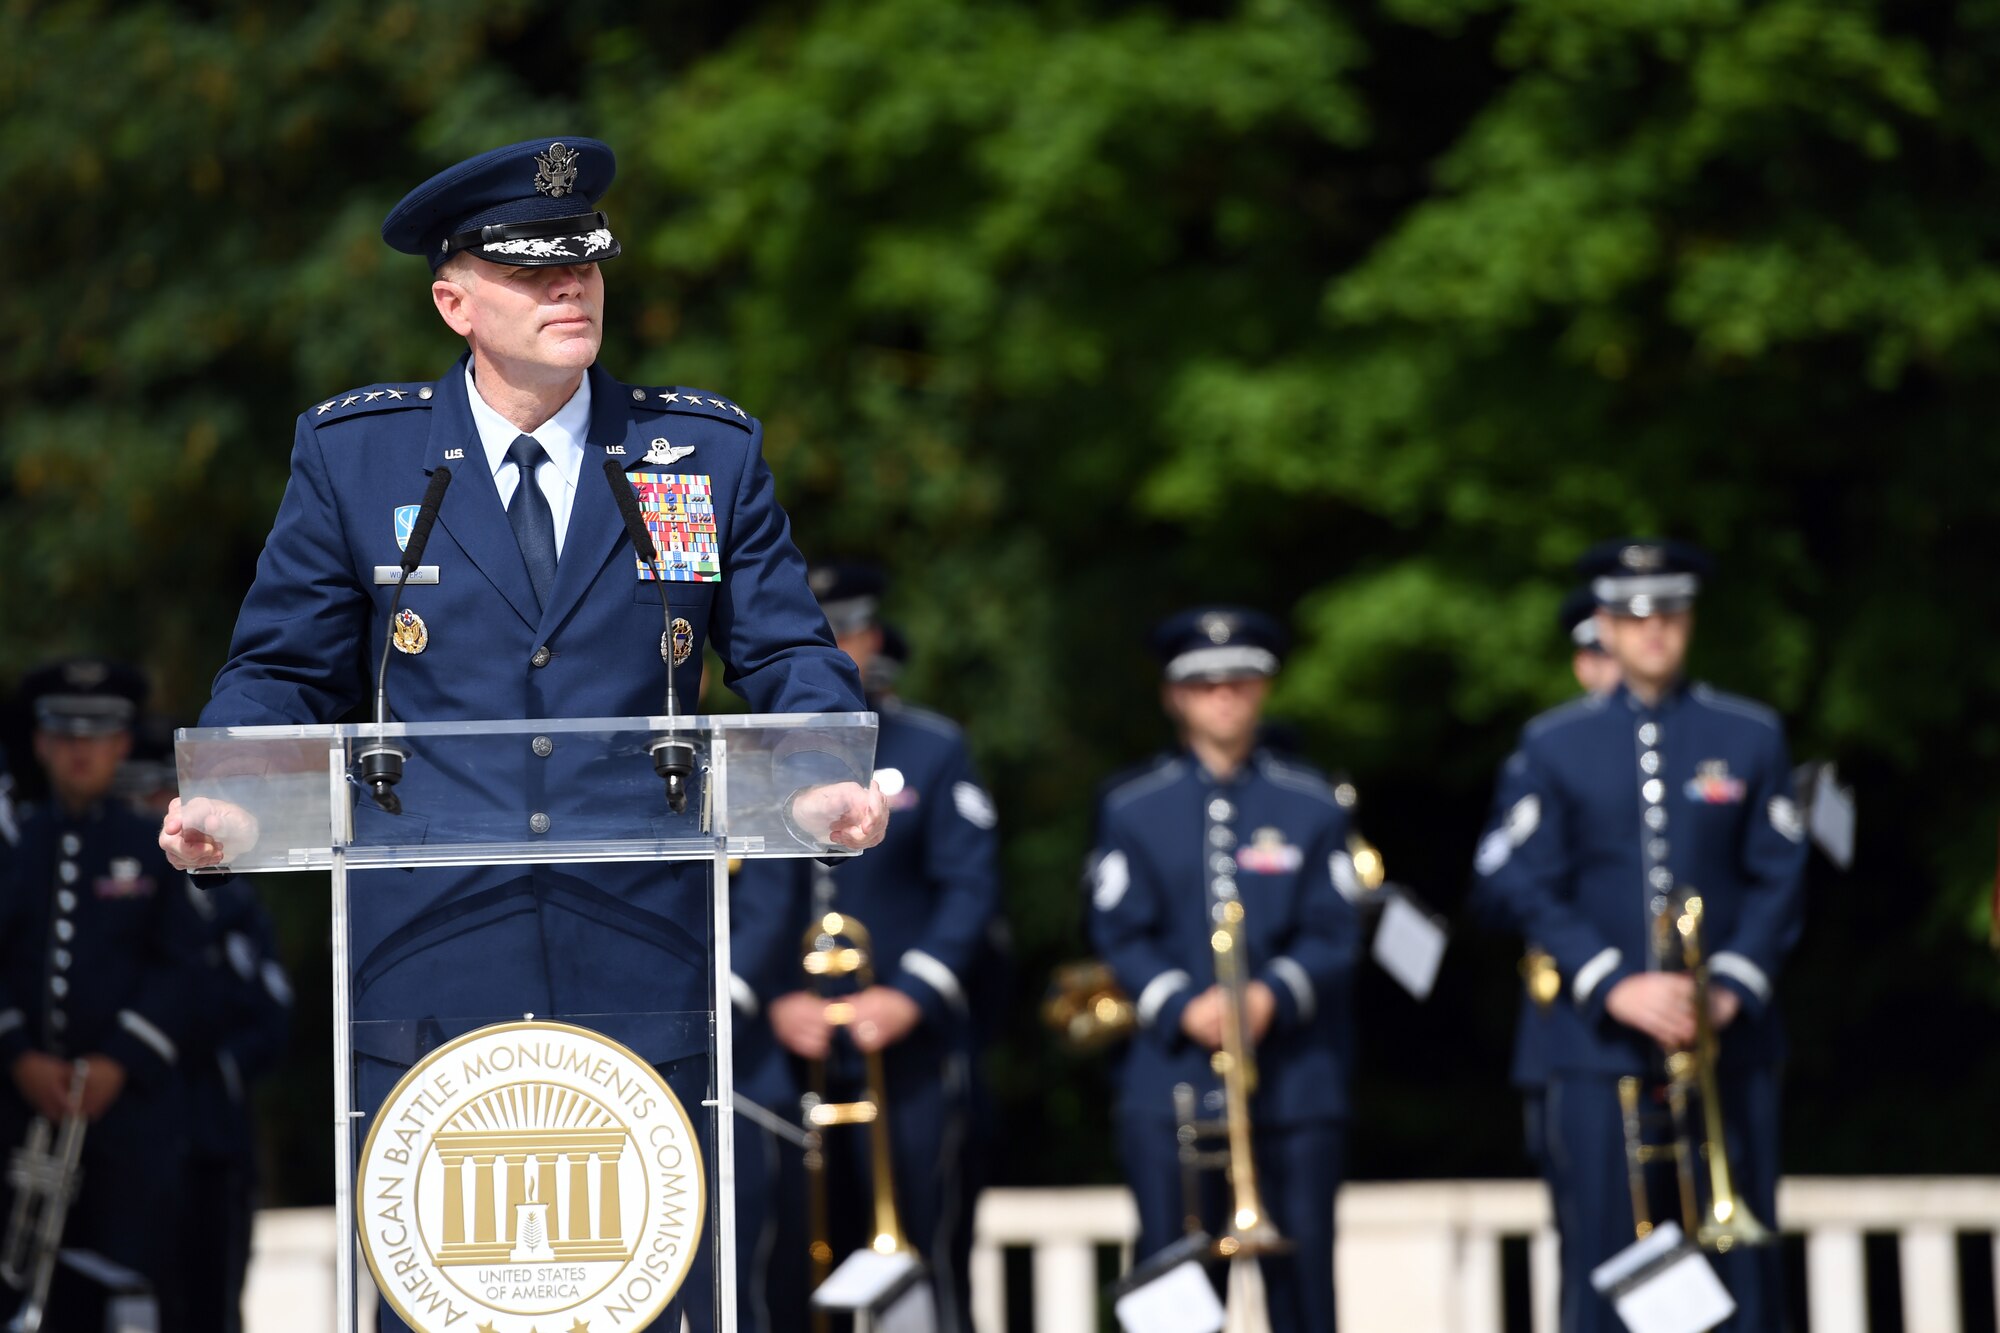 Gen Wolters speaks at a podium during a Memorial Day Ceremony at the Lafayette Escadrille Memorial.